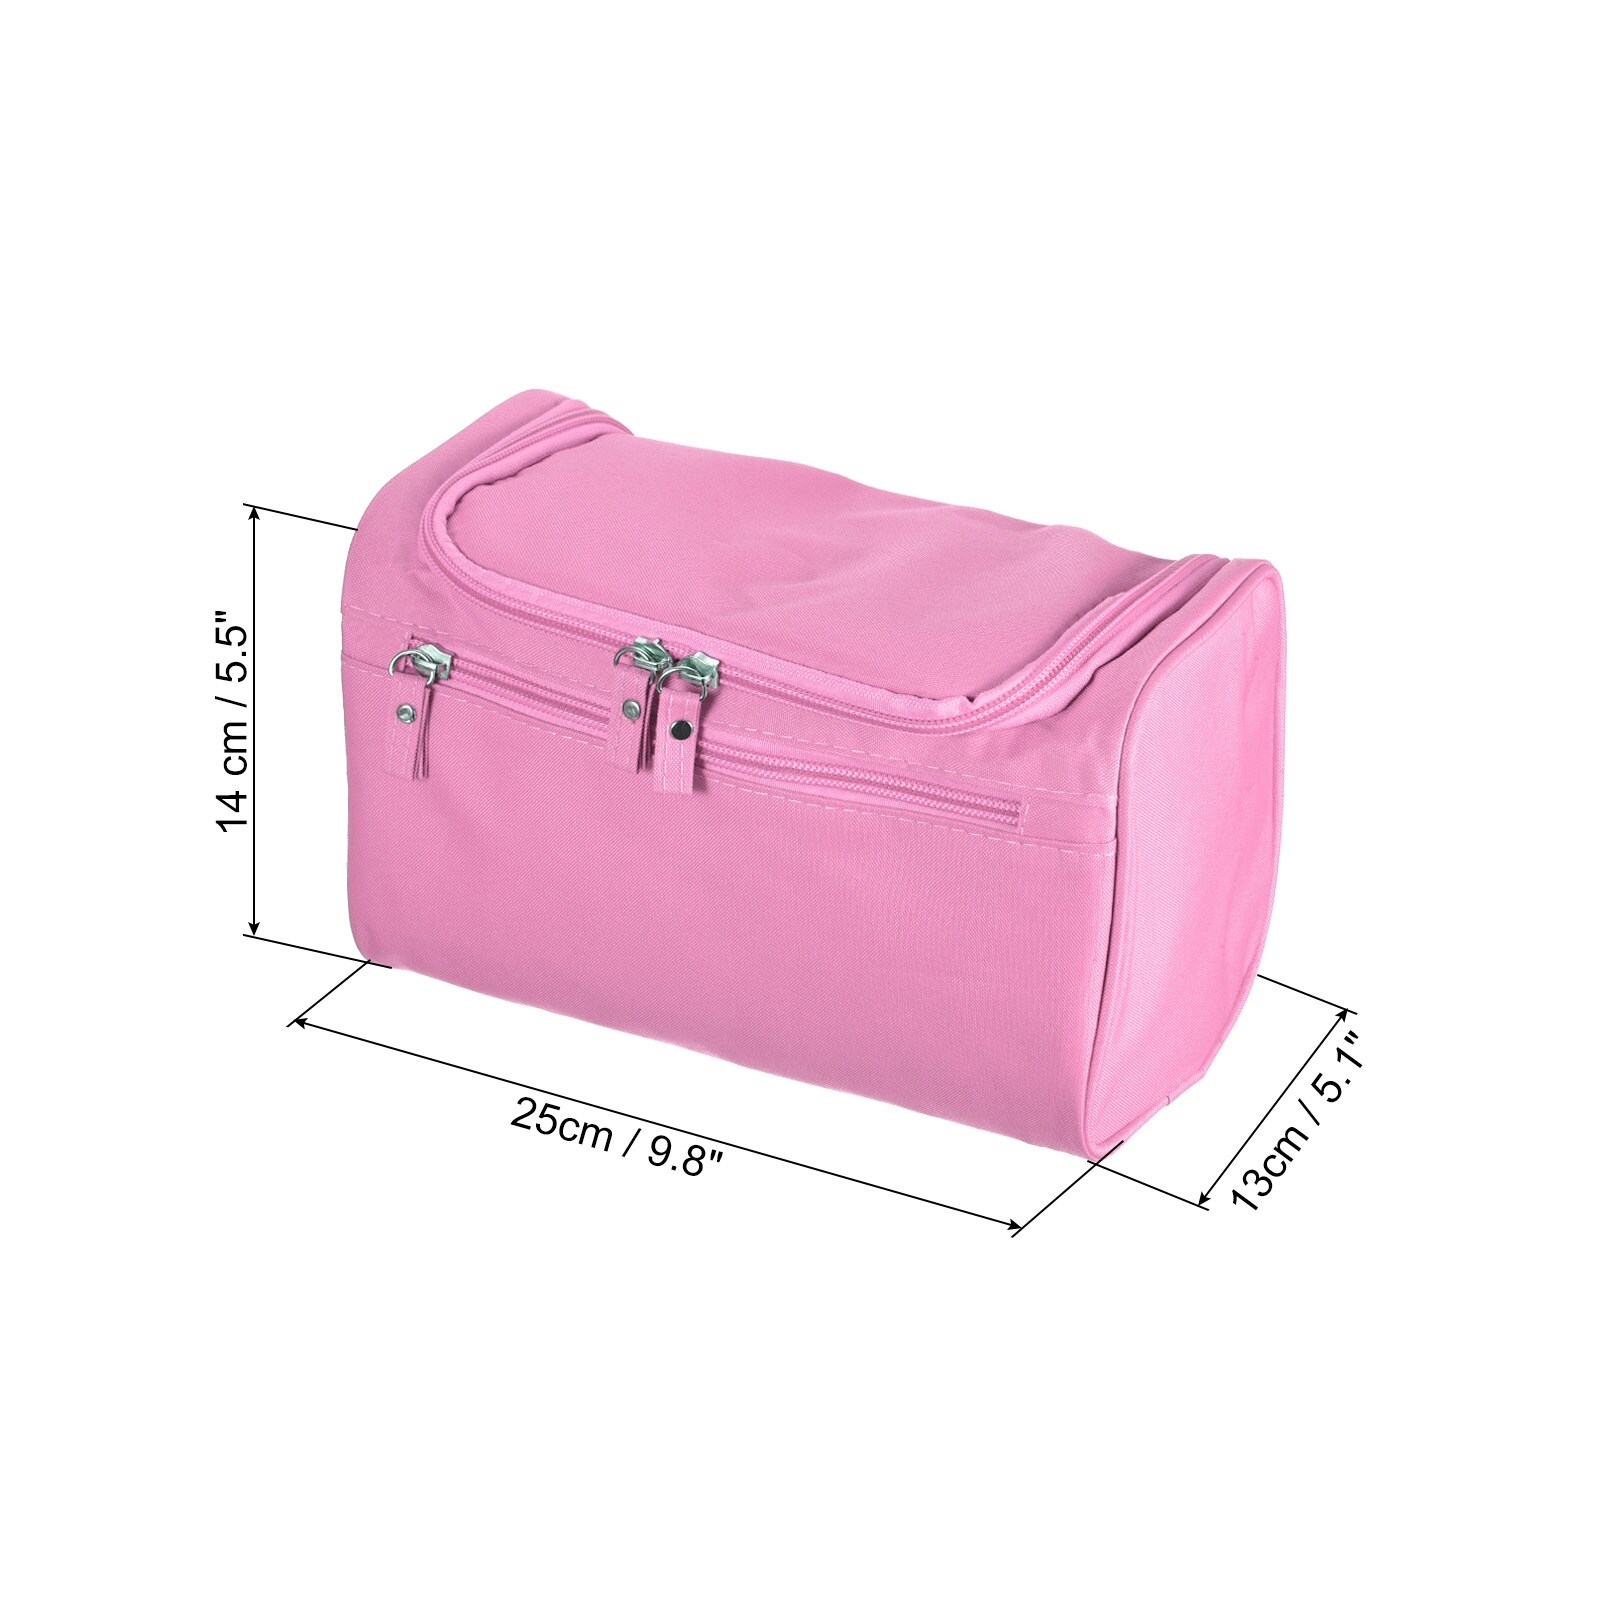 Glamlily Pink Makeup Organizer Travel Case Bag for Cosmetics Make Up, 10.2  x 9.4 x 3.7 in